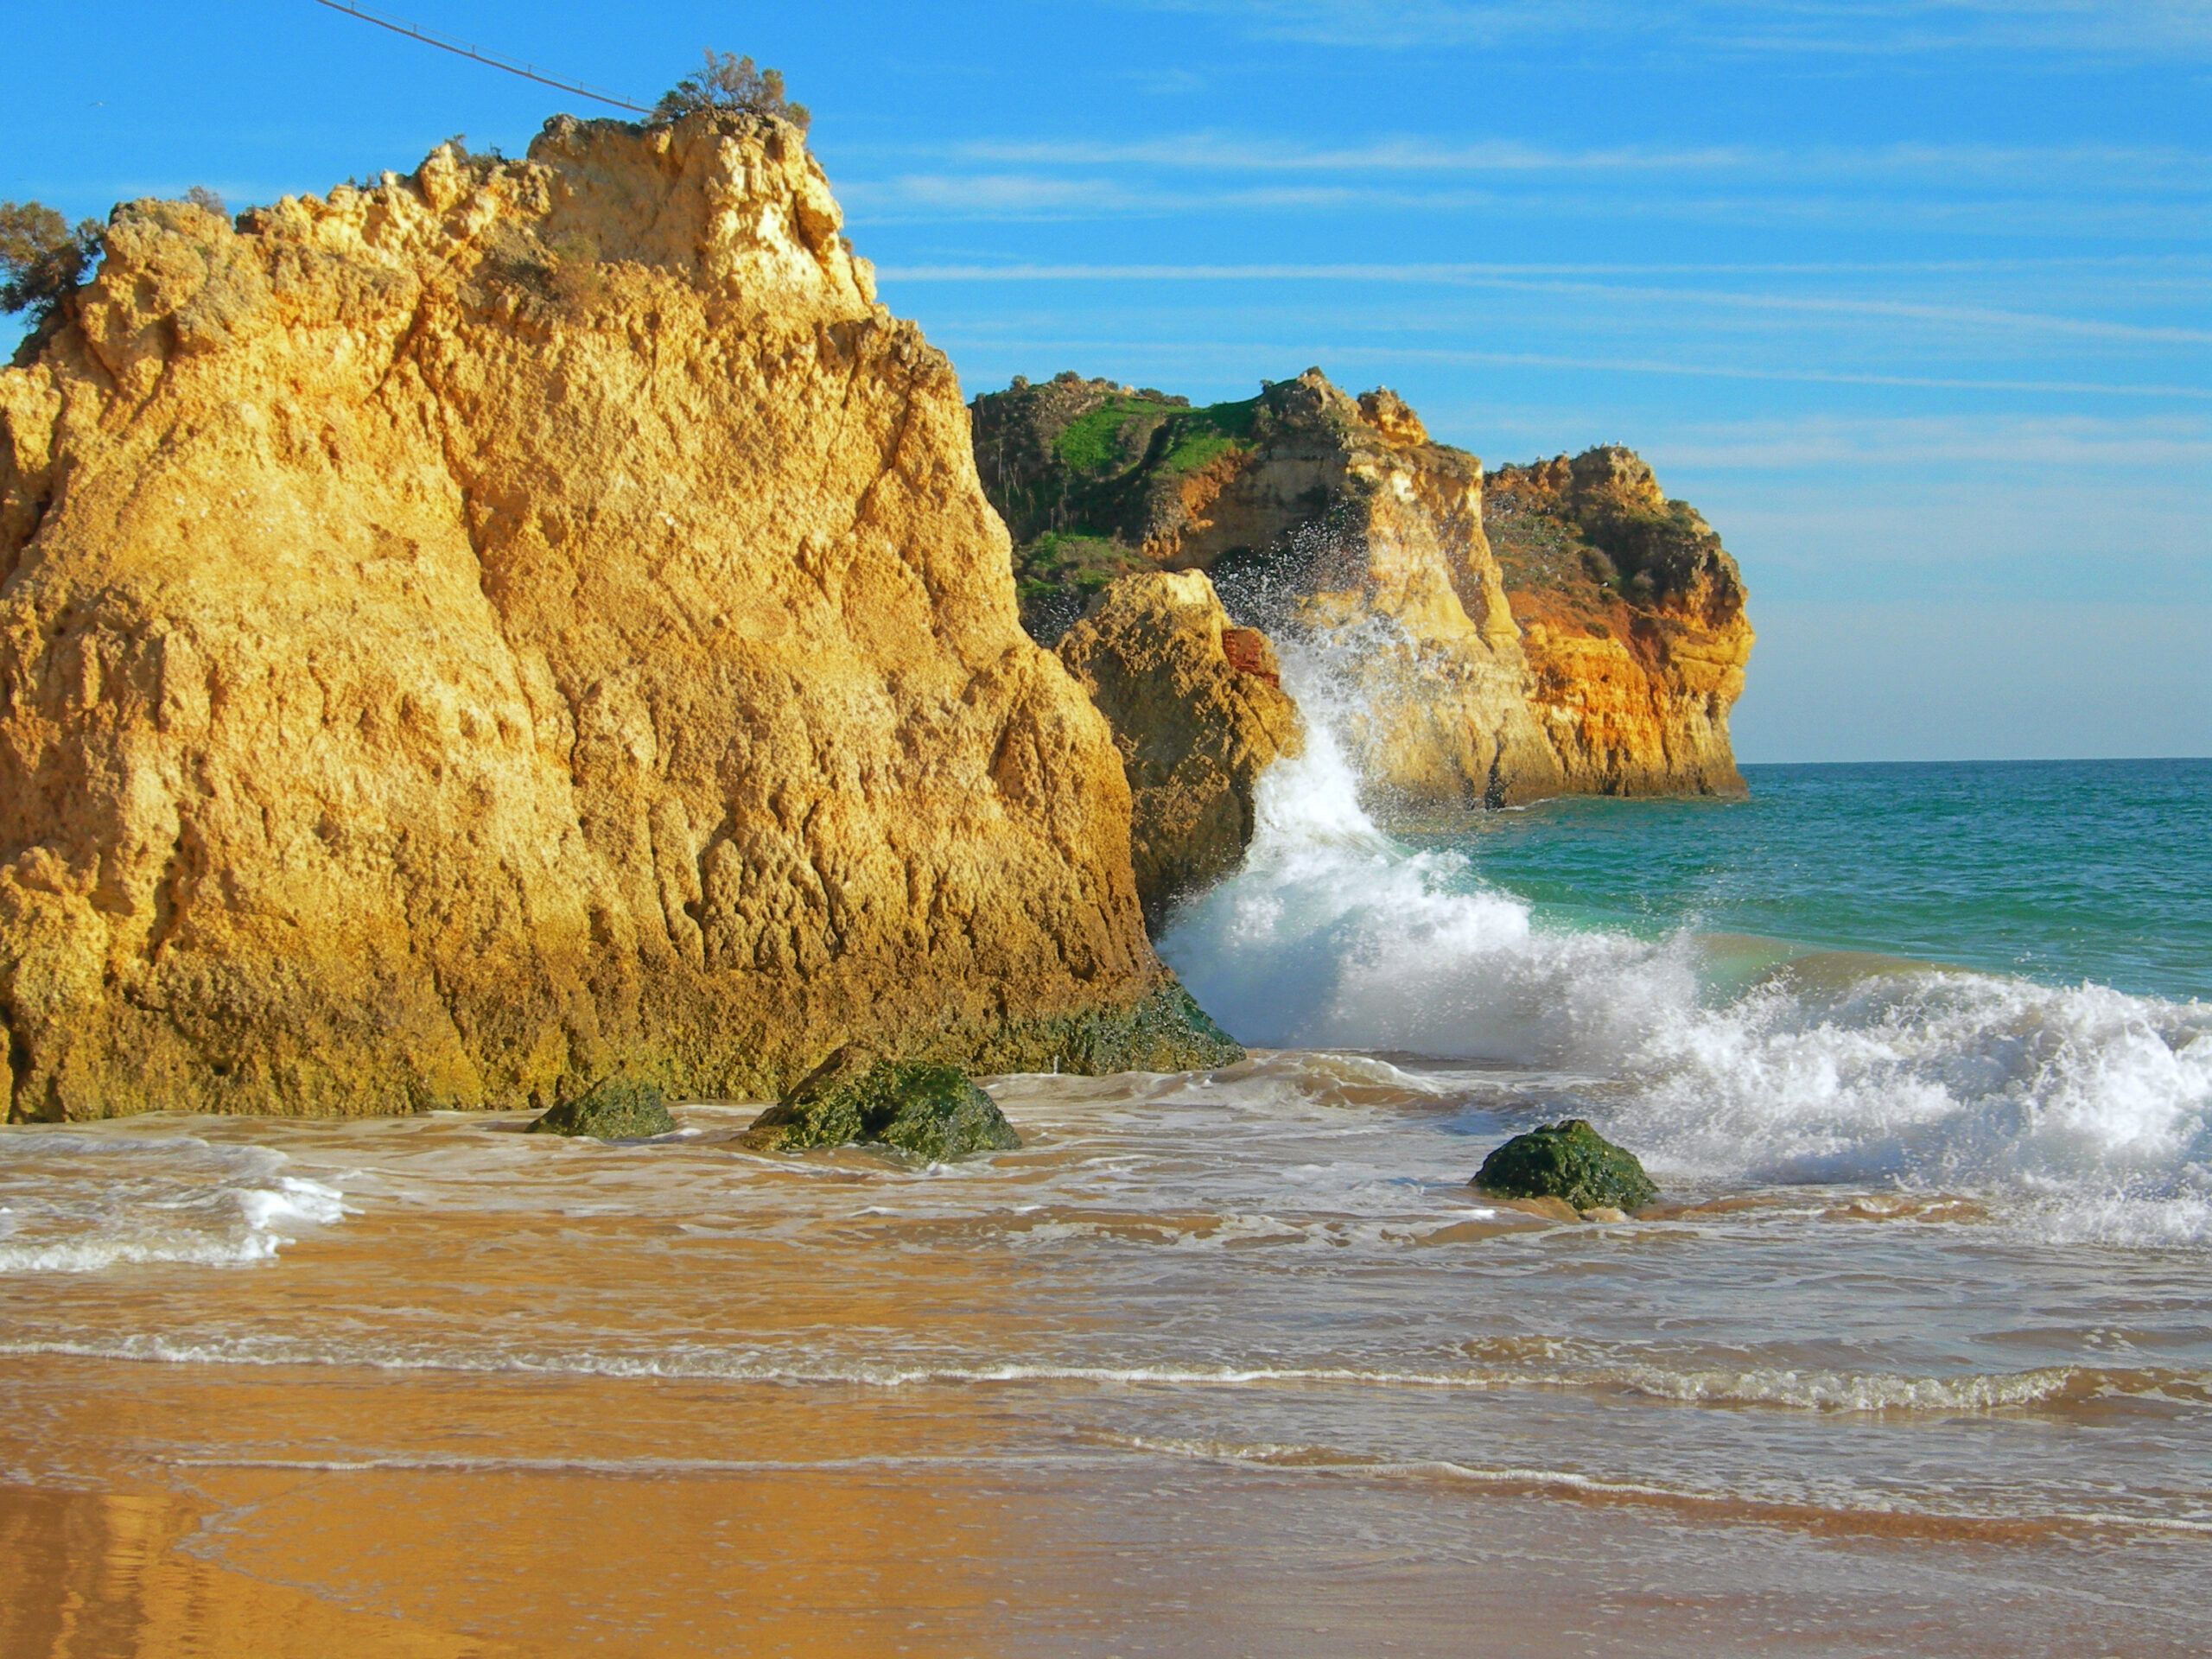 The magnificent views found in the Algarve, the most southwesterly point in Europe, include 200–foot cliffs plunging into the Atlantic.